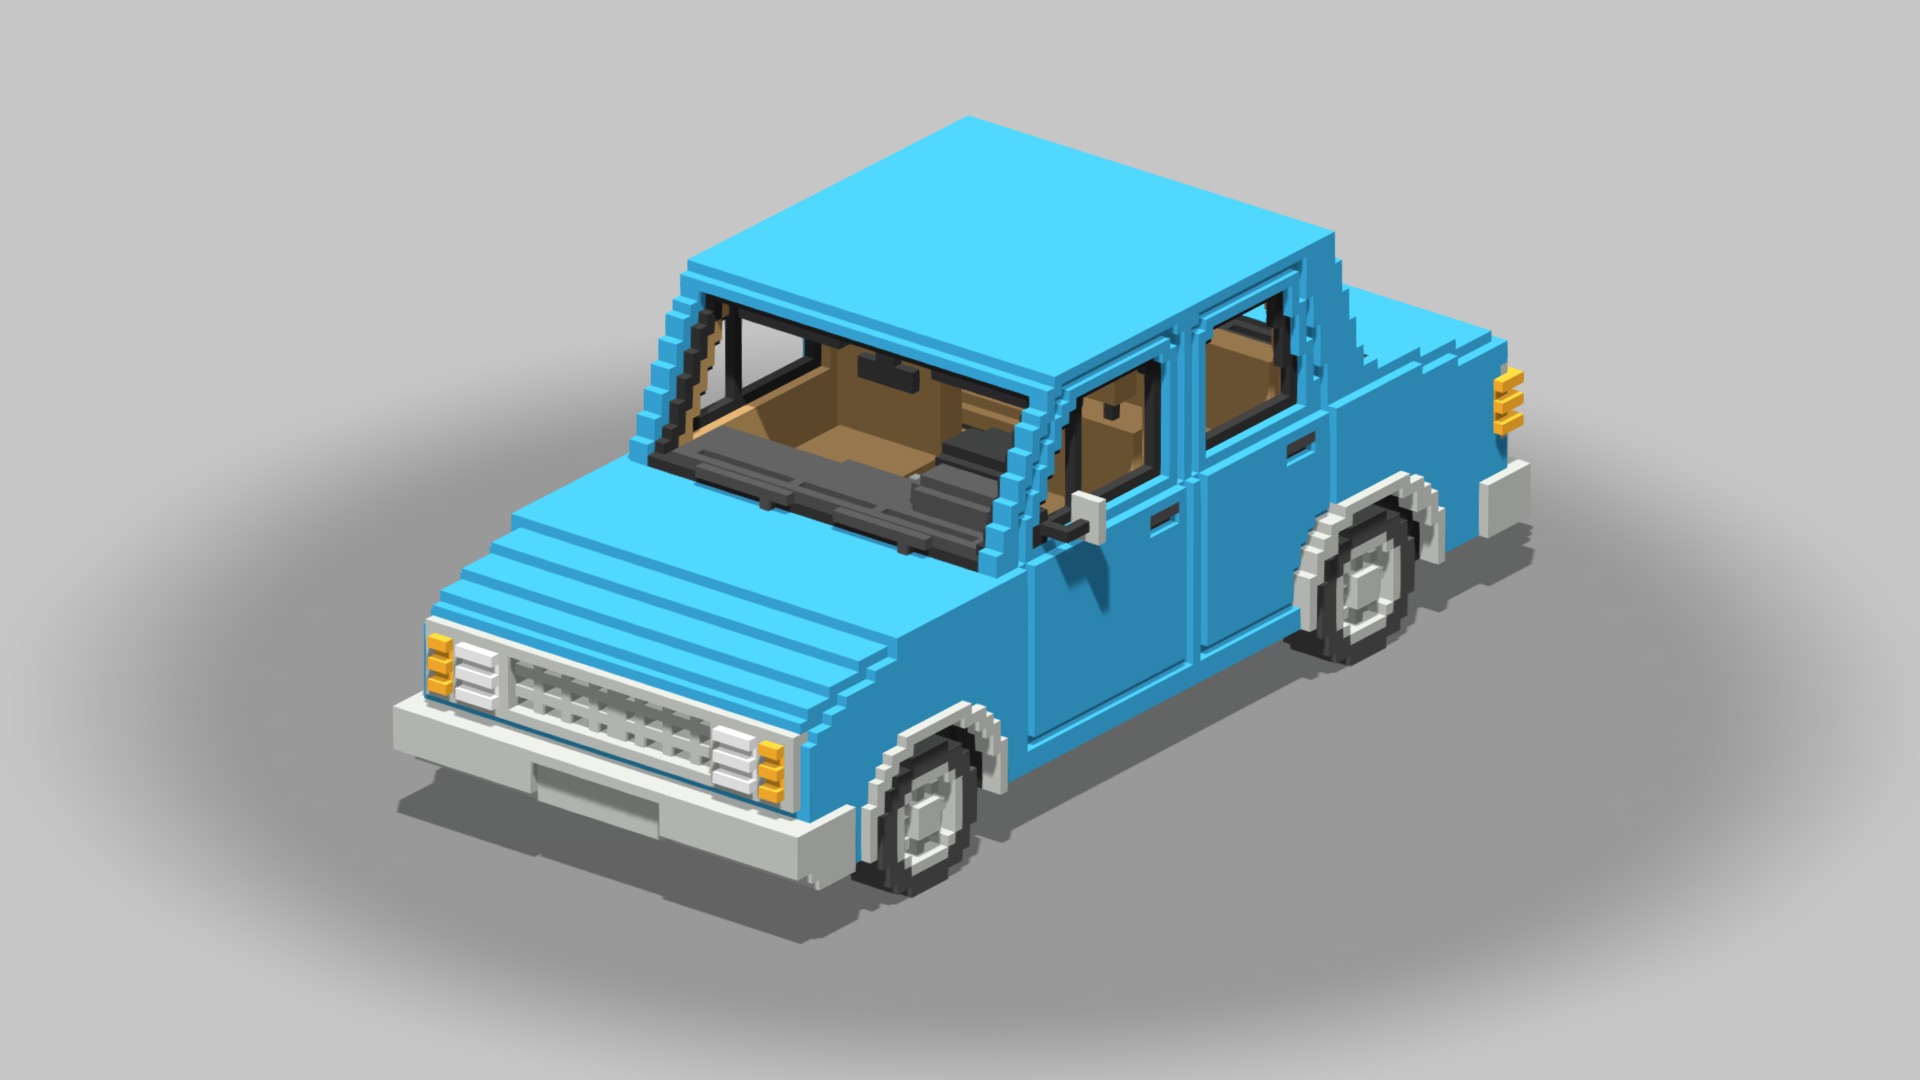 3D model Voxel Sedan Car - This is a 3D model of the Voxel Sedan Car. The 3D model is about a blue and white toy truck.